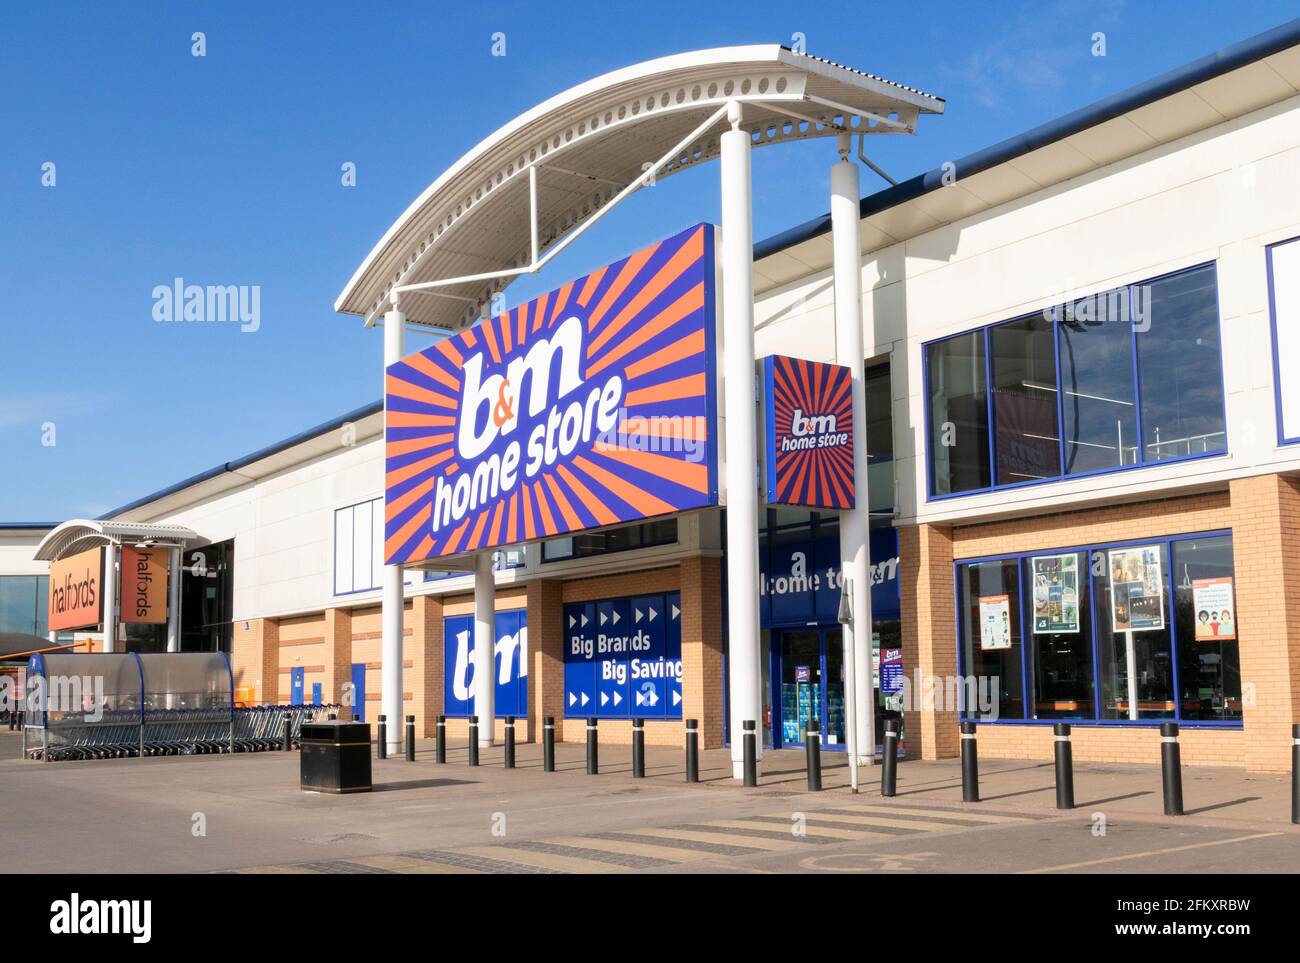 B&M home store logo and store front Victoria retail park Netherfield Nottingham East mIdlands England GB UK Europe Stock Photo